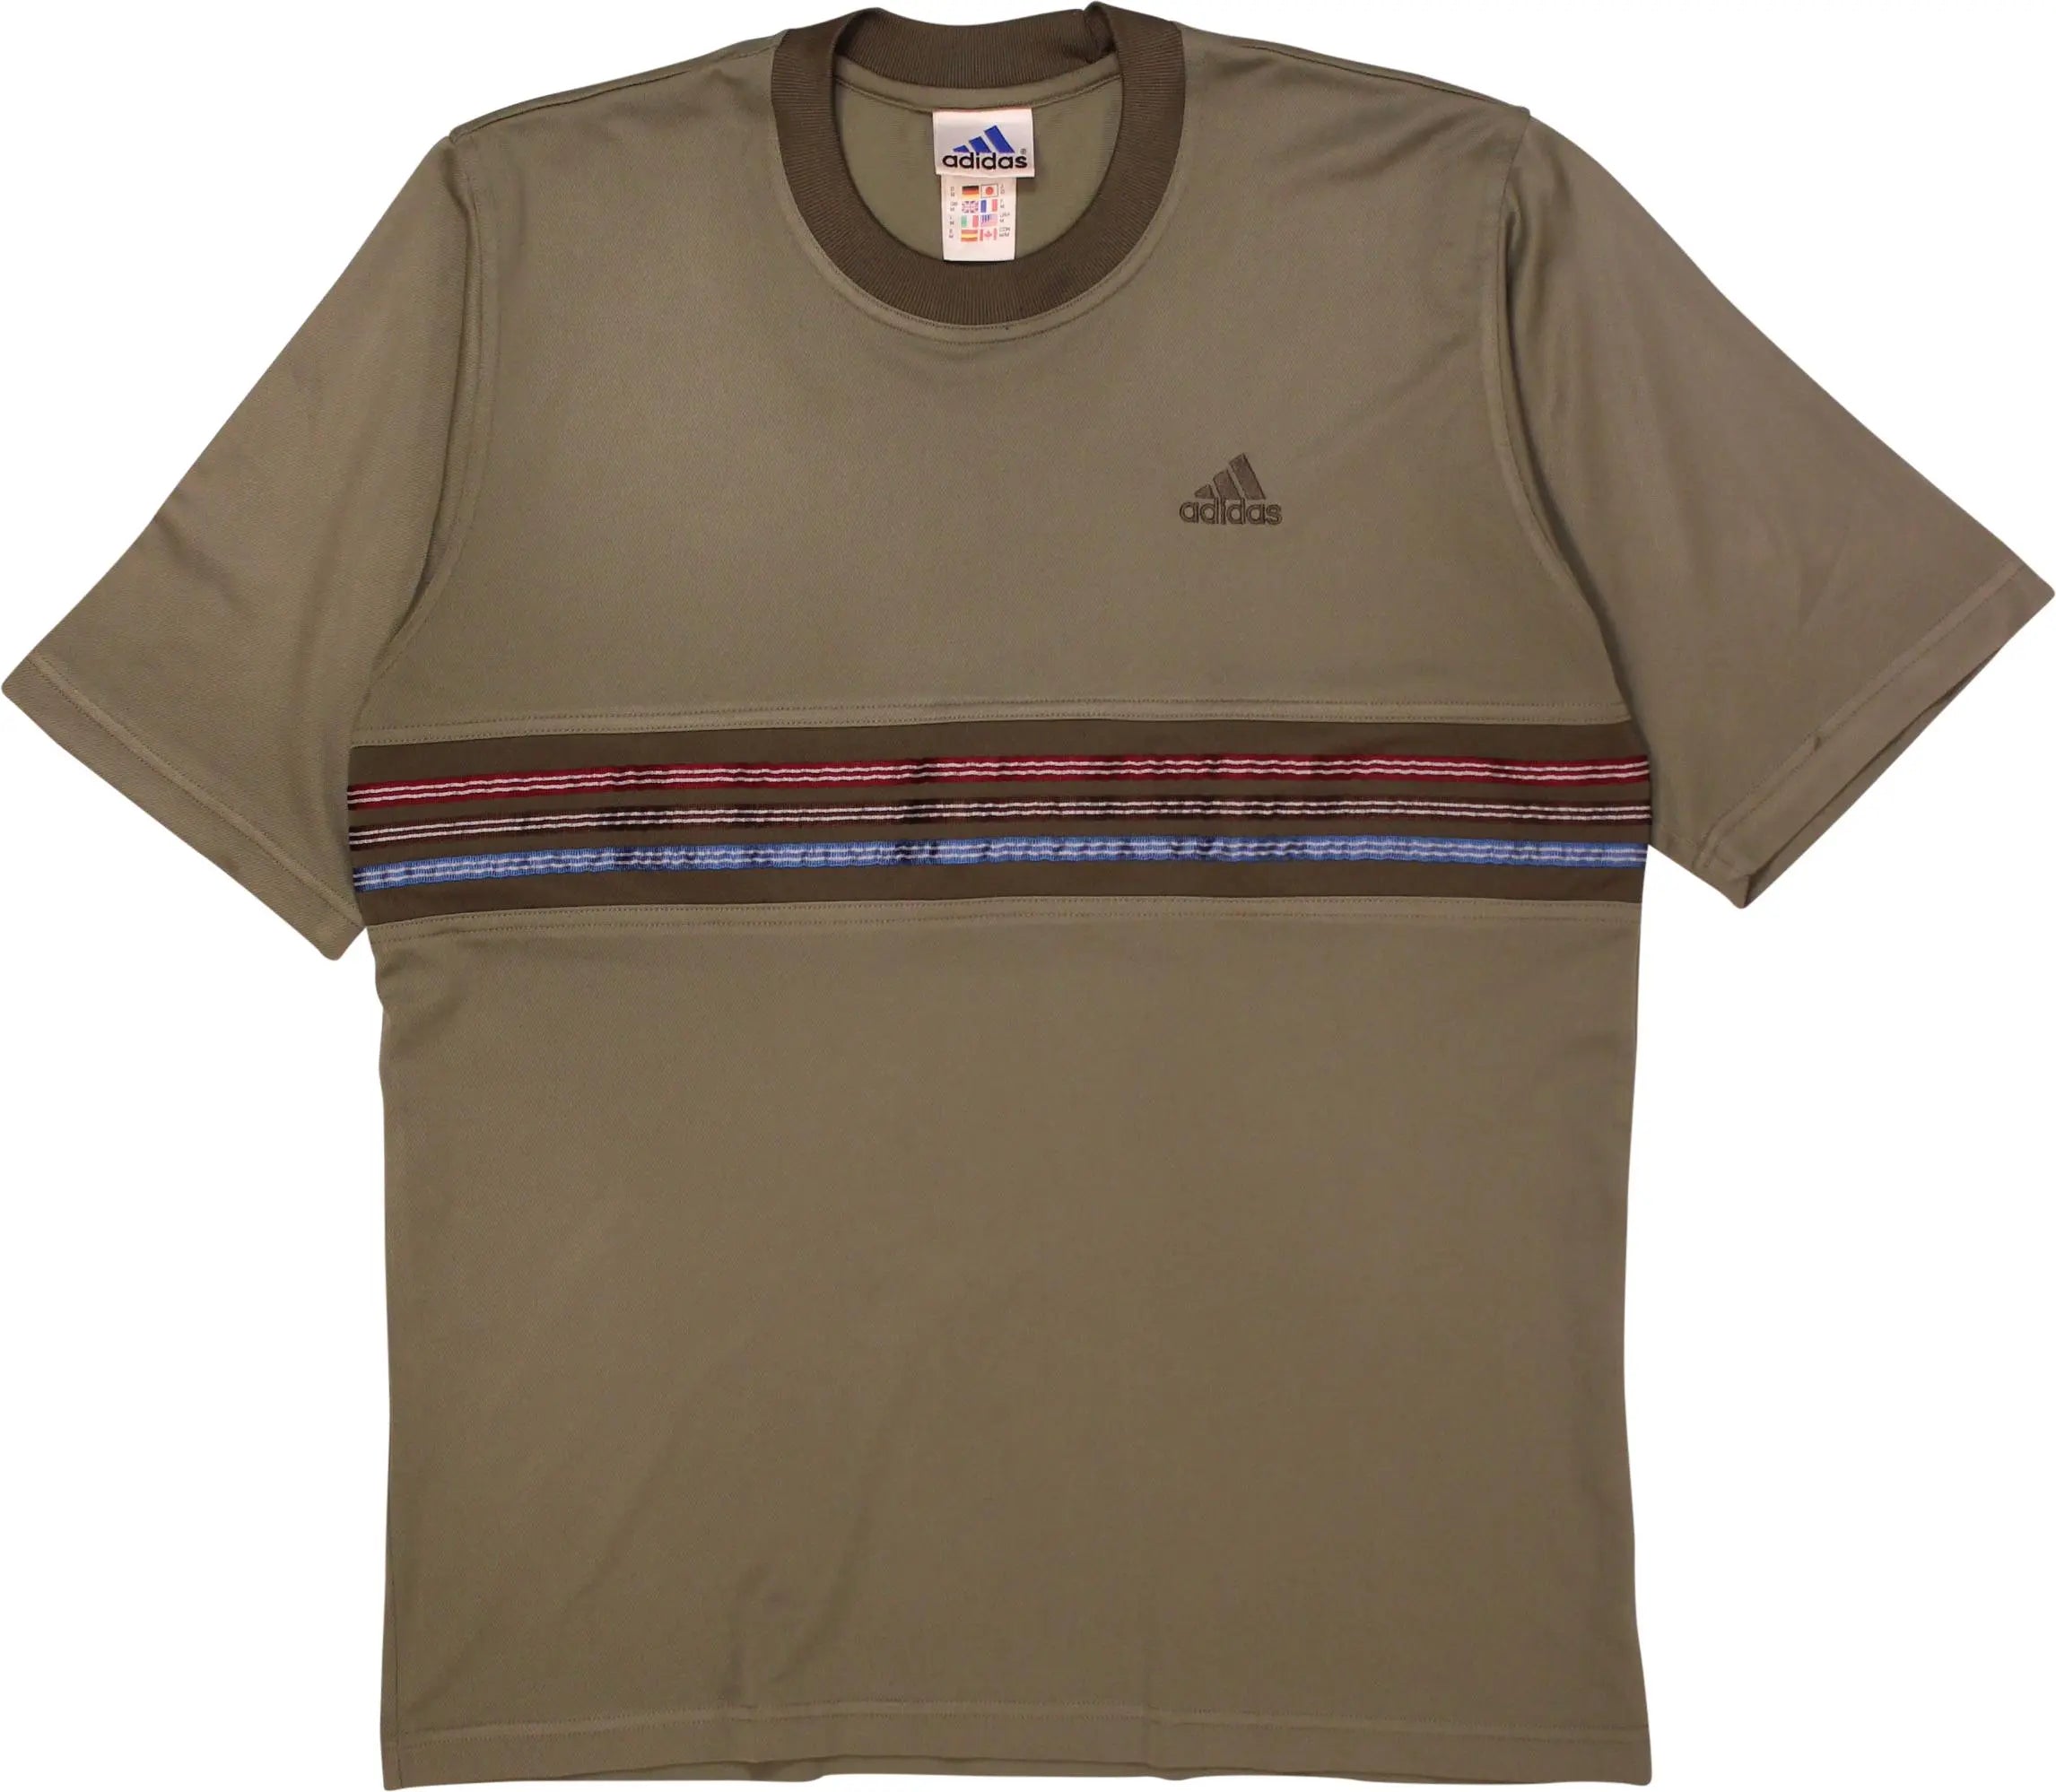 Adidas - 90s Adidas T-shirt- ThriftTale.com - Vintage and second handclothing